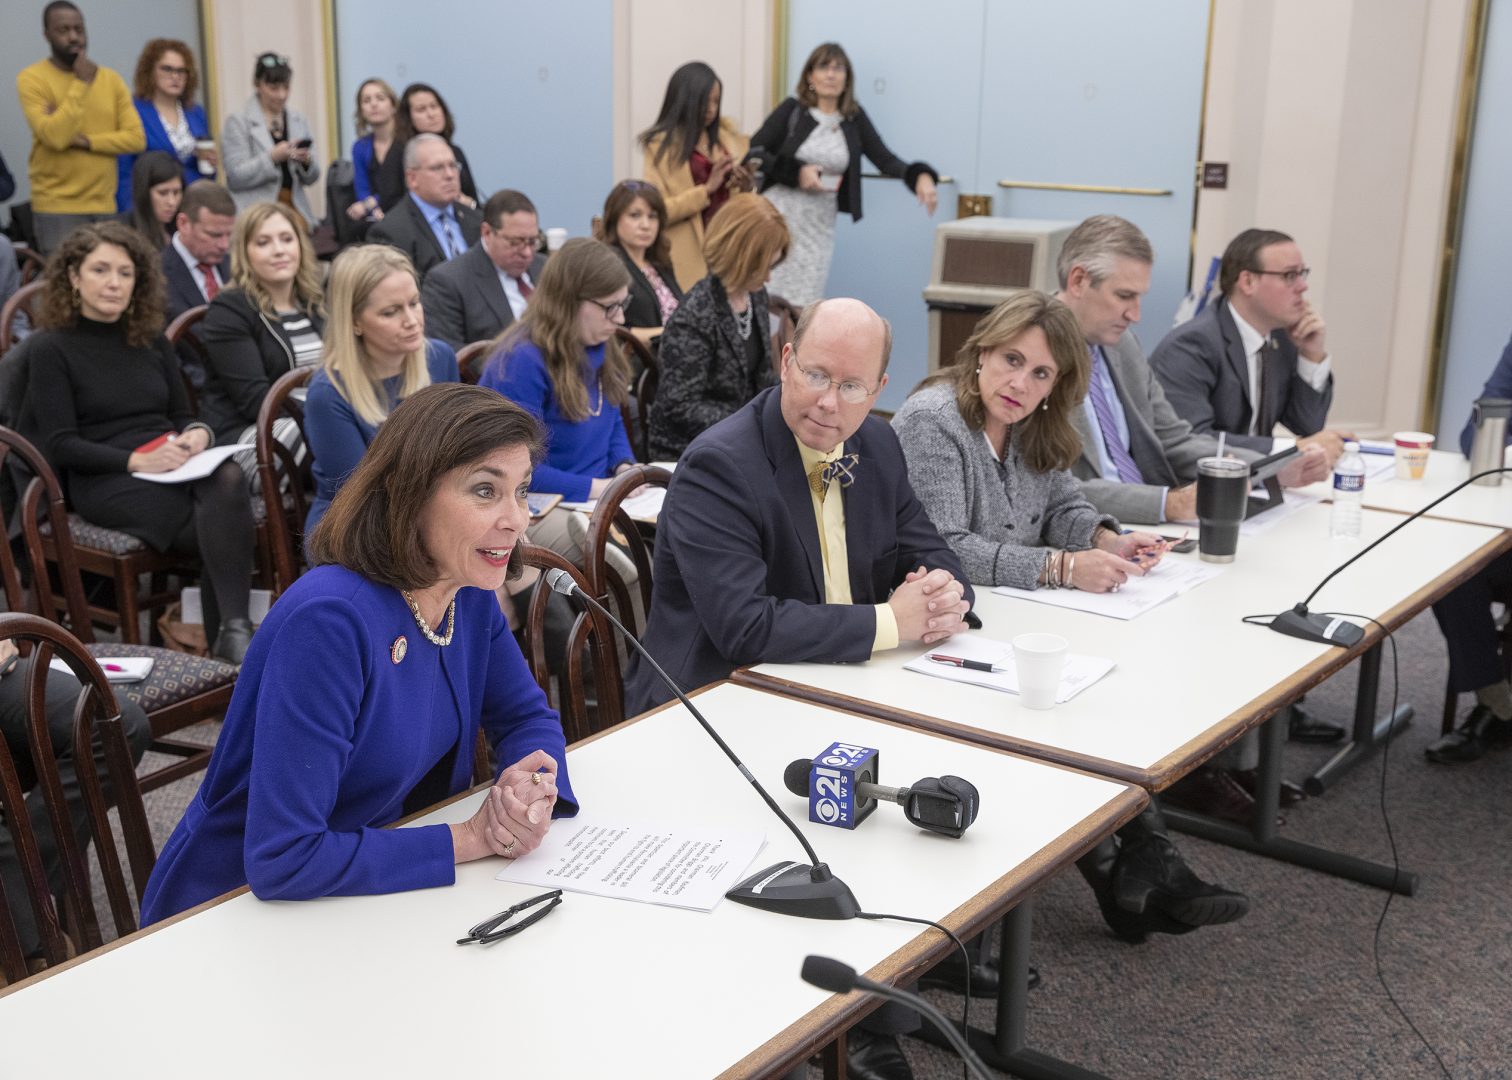 FILE PHOTO: State Sen. Kristin Phillips-Hill, R-York, (left) speaks in support of Senate Bill 60, also known as the “Buyer Beware Act,” during a House Judiciary Committee hearing on Jan. 14, 2020. Also pictured, from left: state Rep. Paul Schemel, R-Franklin, Rep. Sheryl Delozier, R-Cumberland, Rep. Todd Stephens, R-Montgomery and Rep. Matt Dowling, R-Fayette/Somerset.